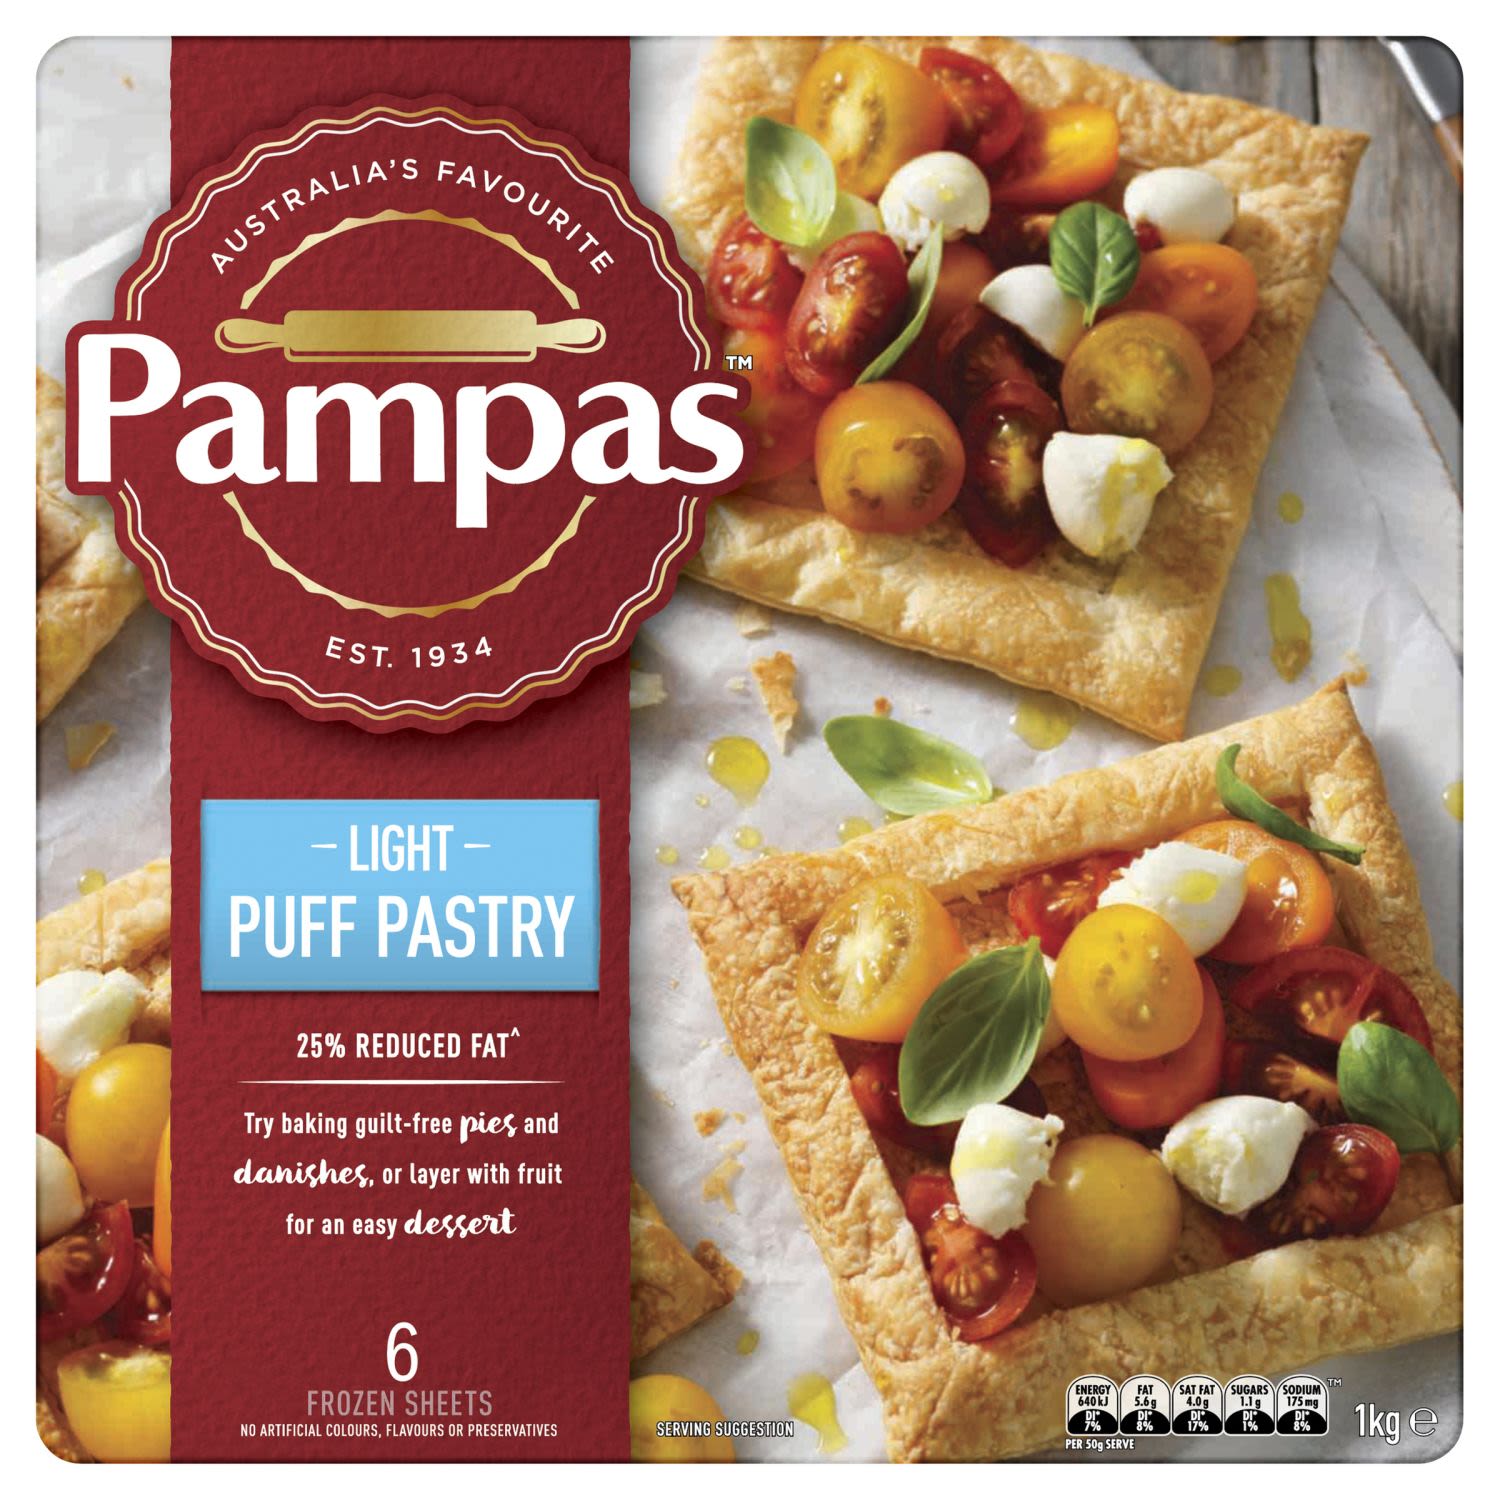 Pampas Puff Pastry Reduced Fat, 1 Kilogram